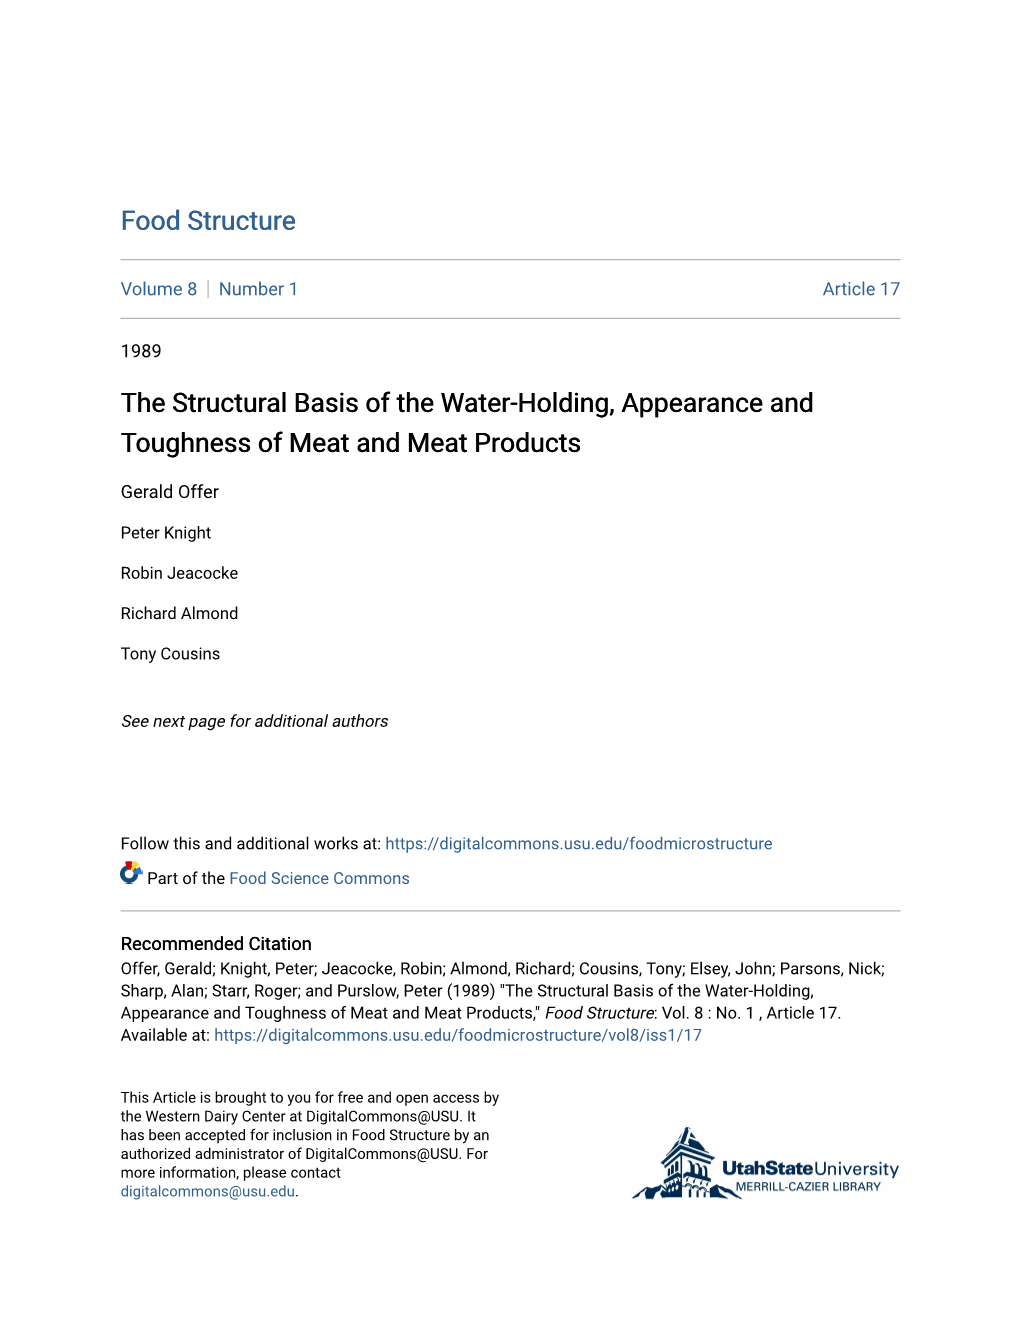 The Structural Basis of the Water-Holding, Appearance and Toughness of Meat and Meat Products